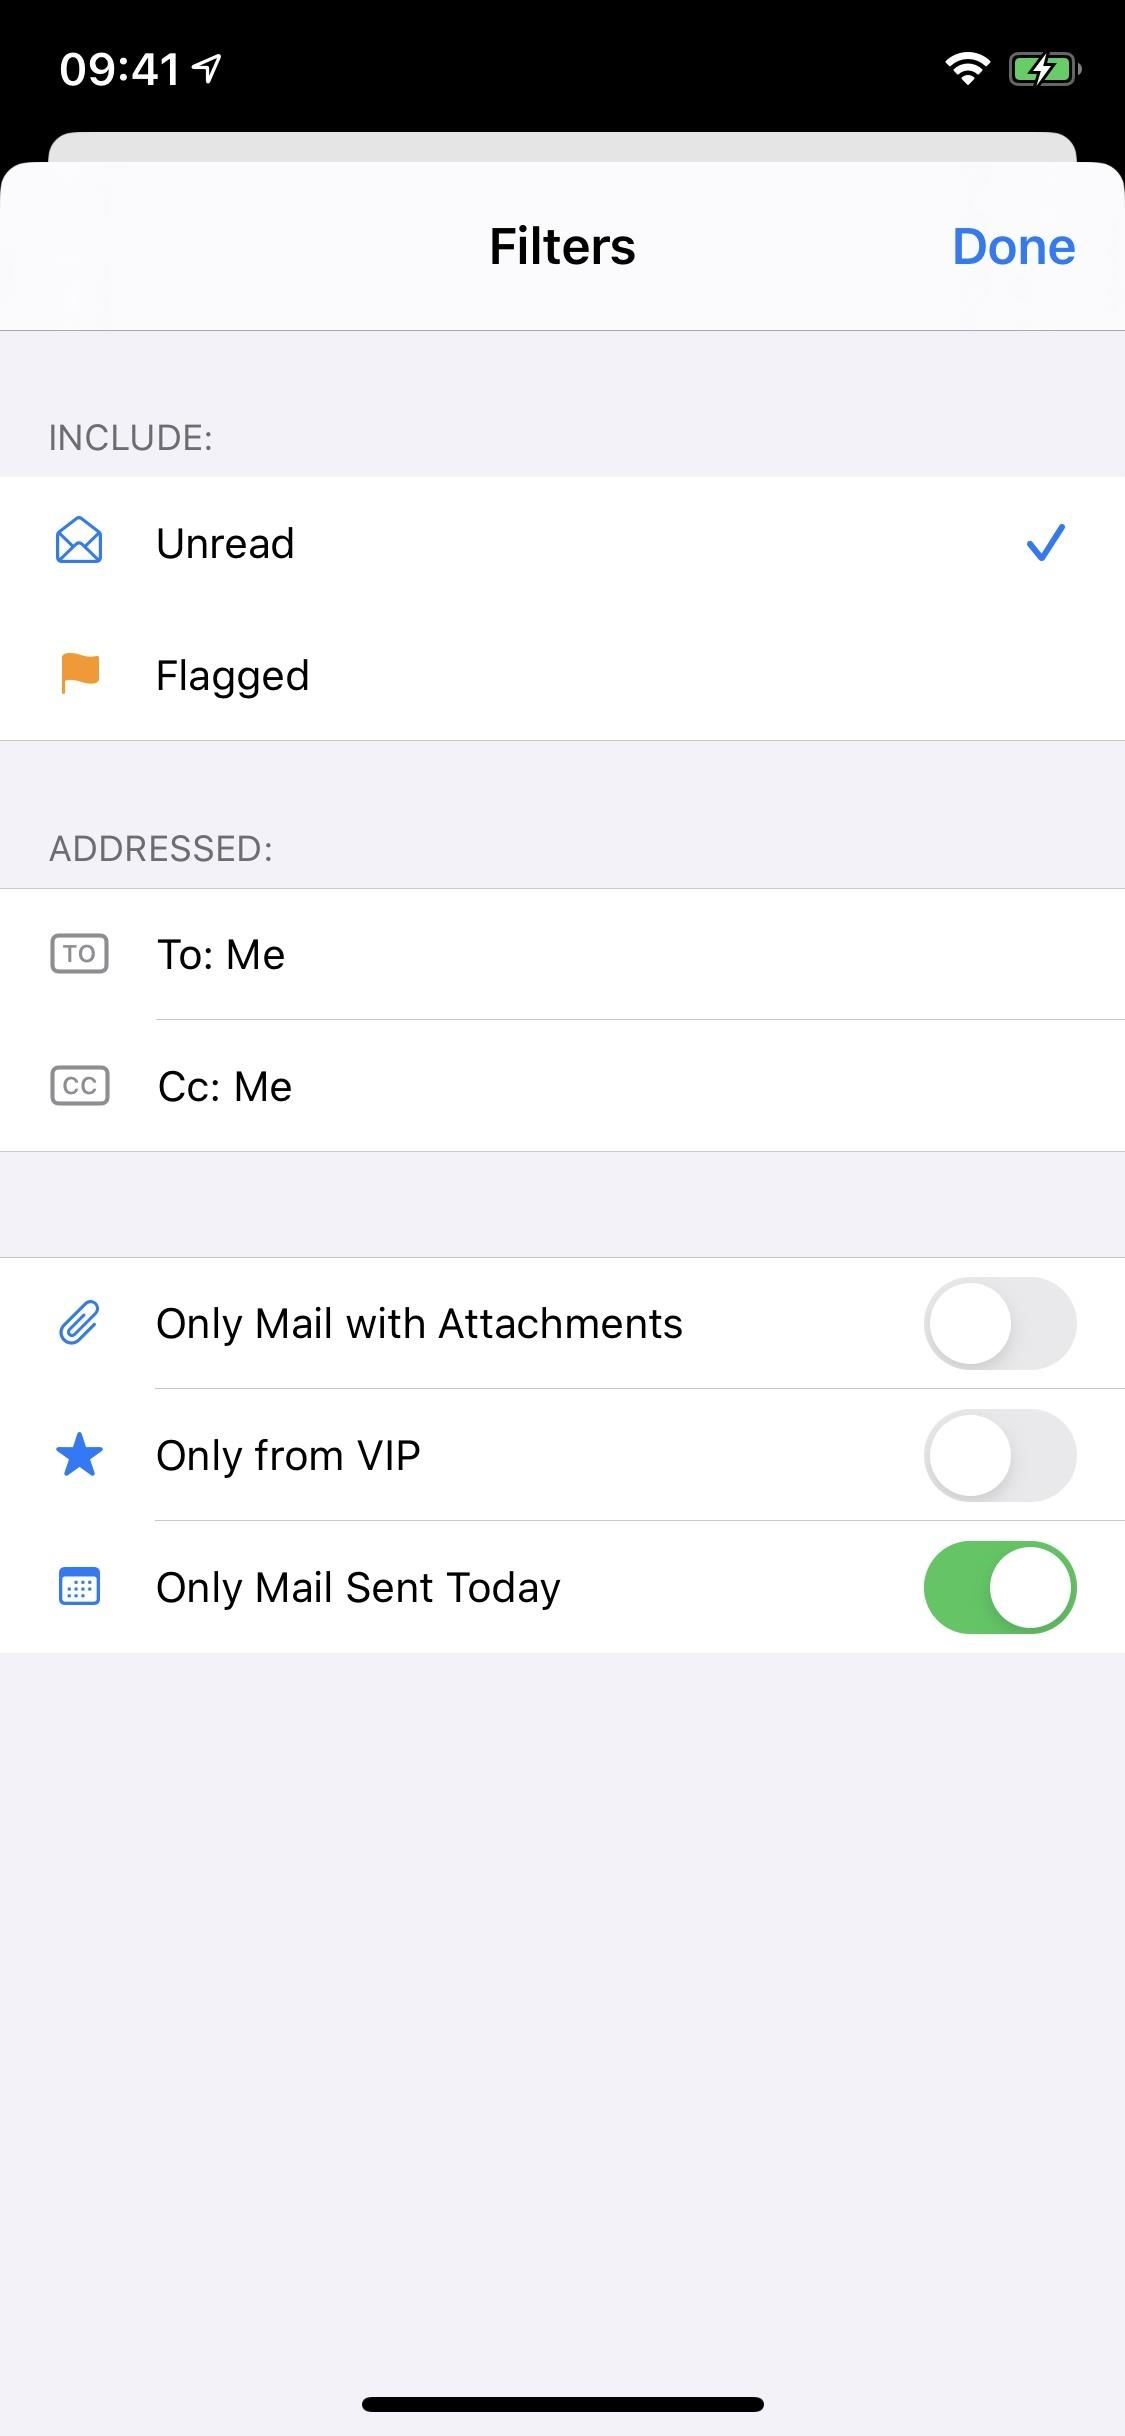 22 New Features in iOS 13's Mail App to Help You Master the Art of the Email